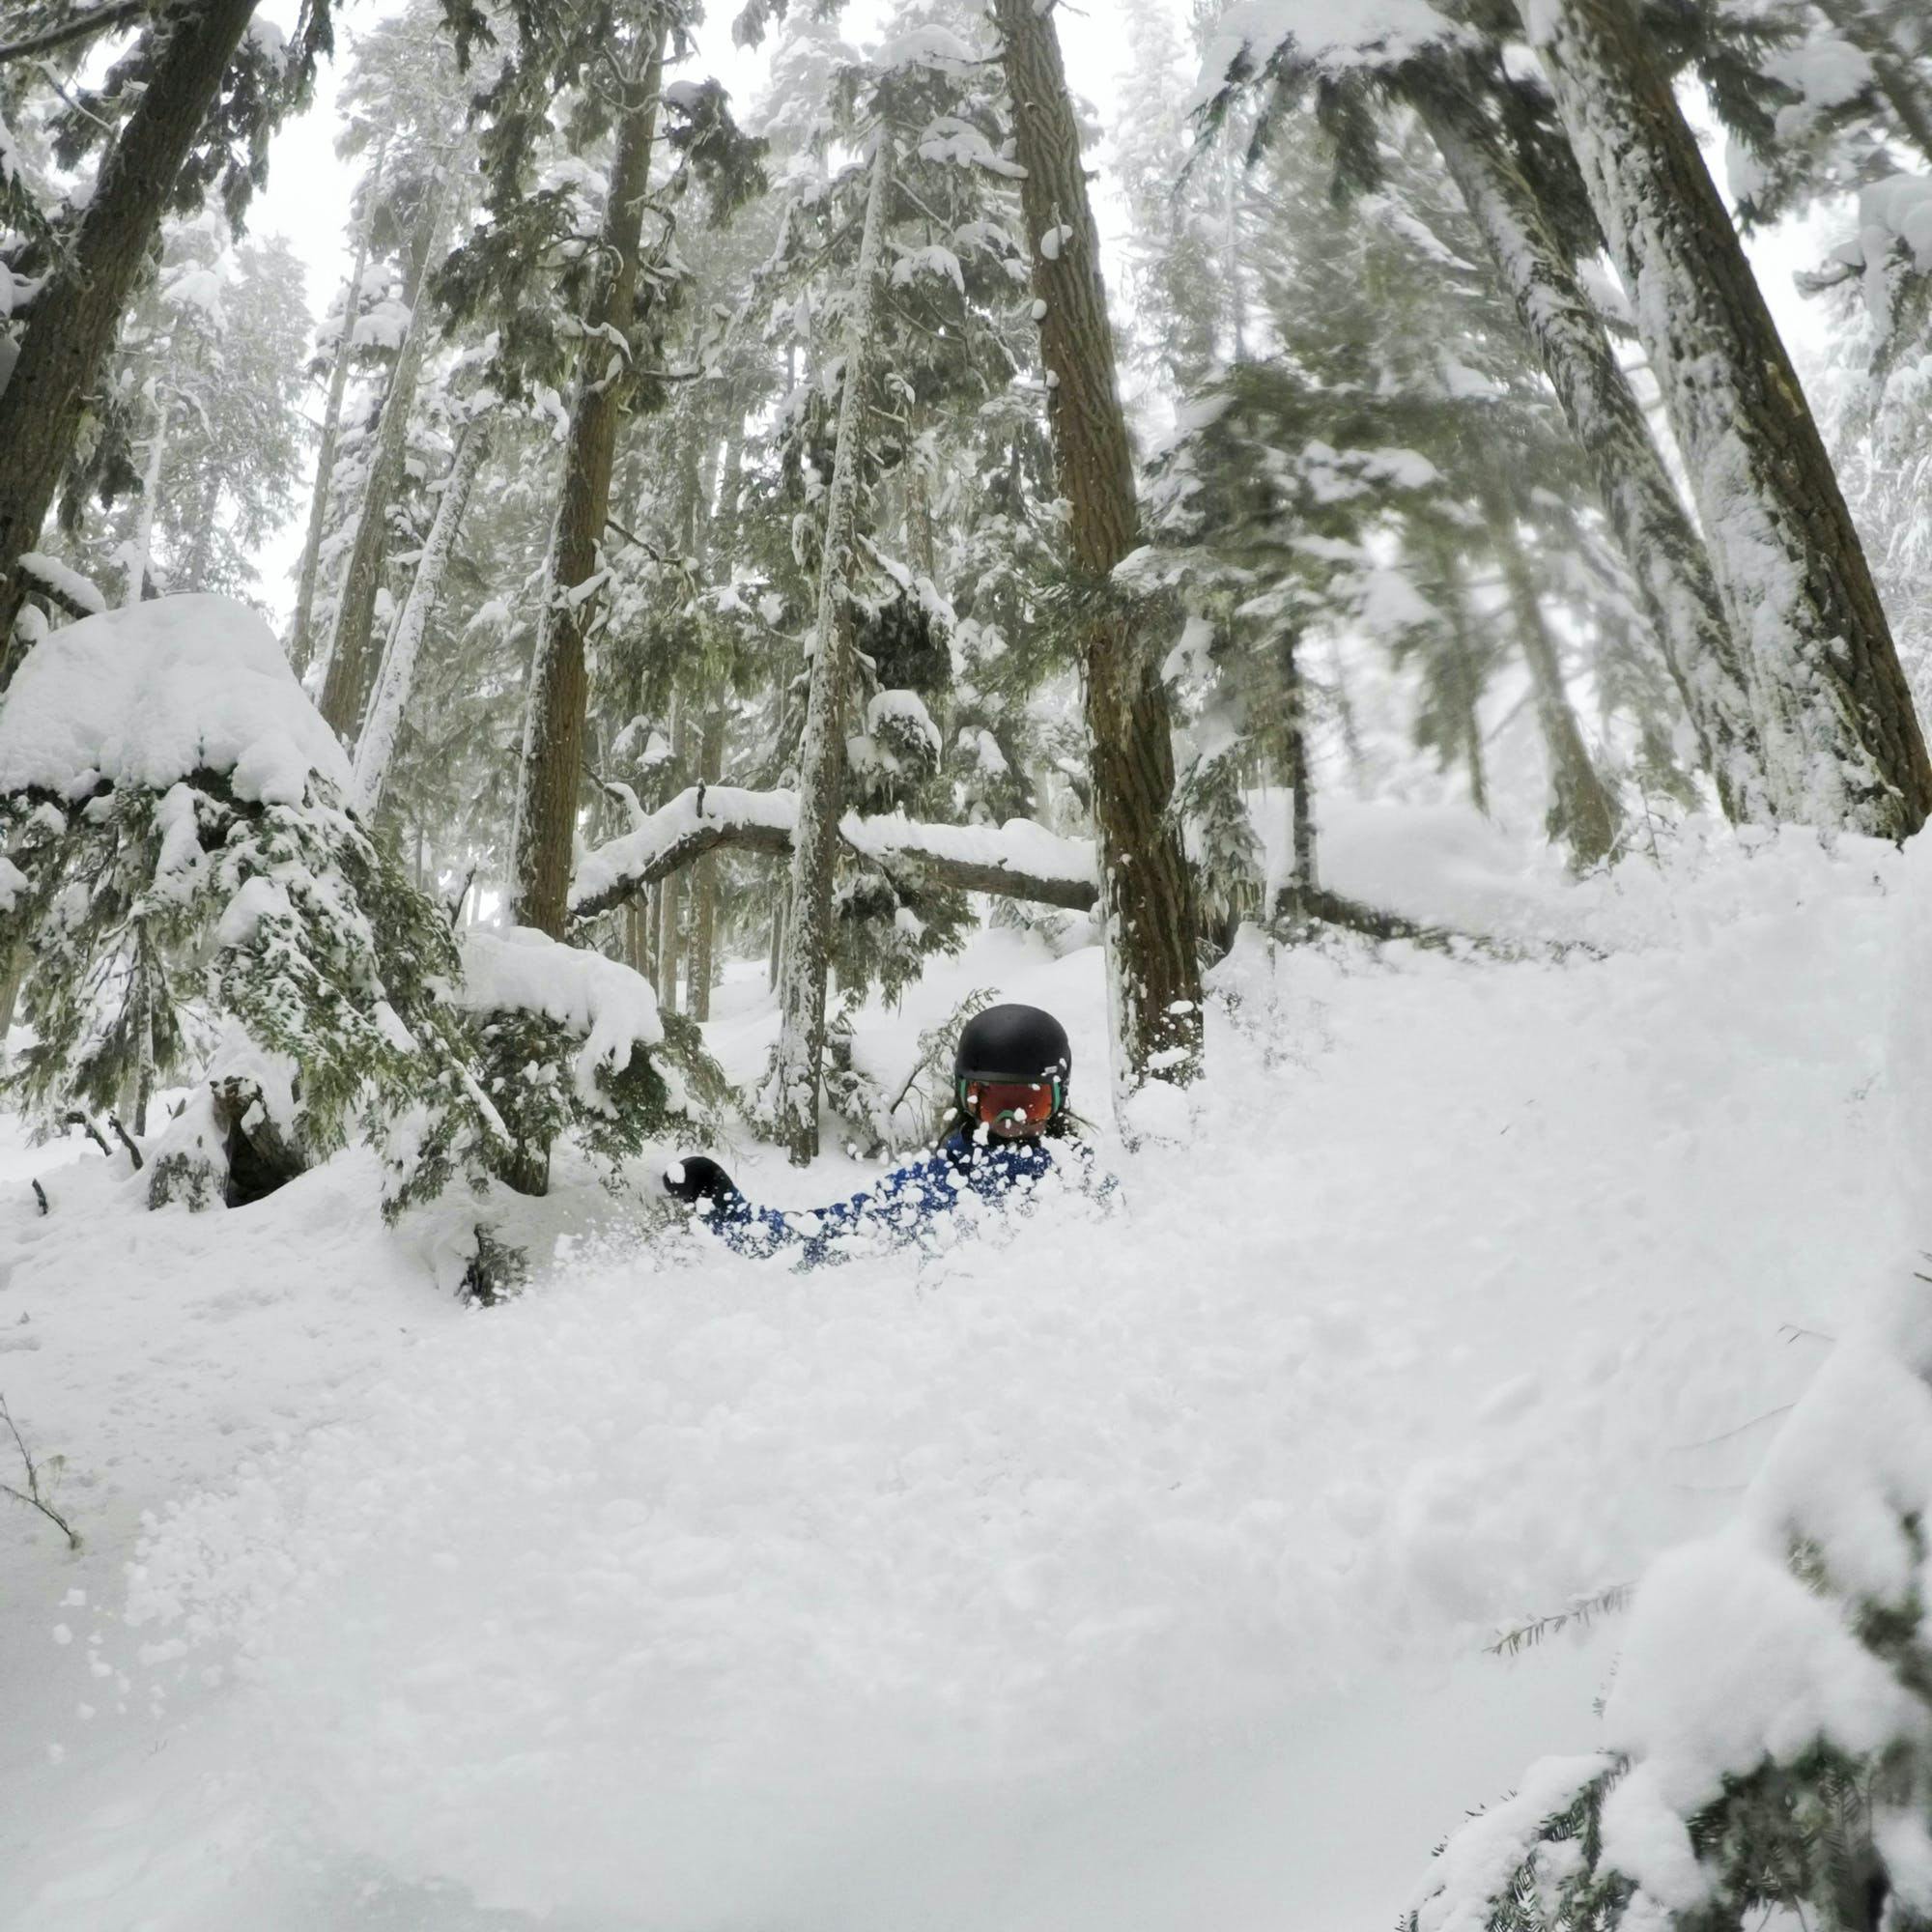 Abby Cooper snowboarding in powder under trees.